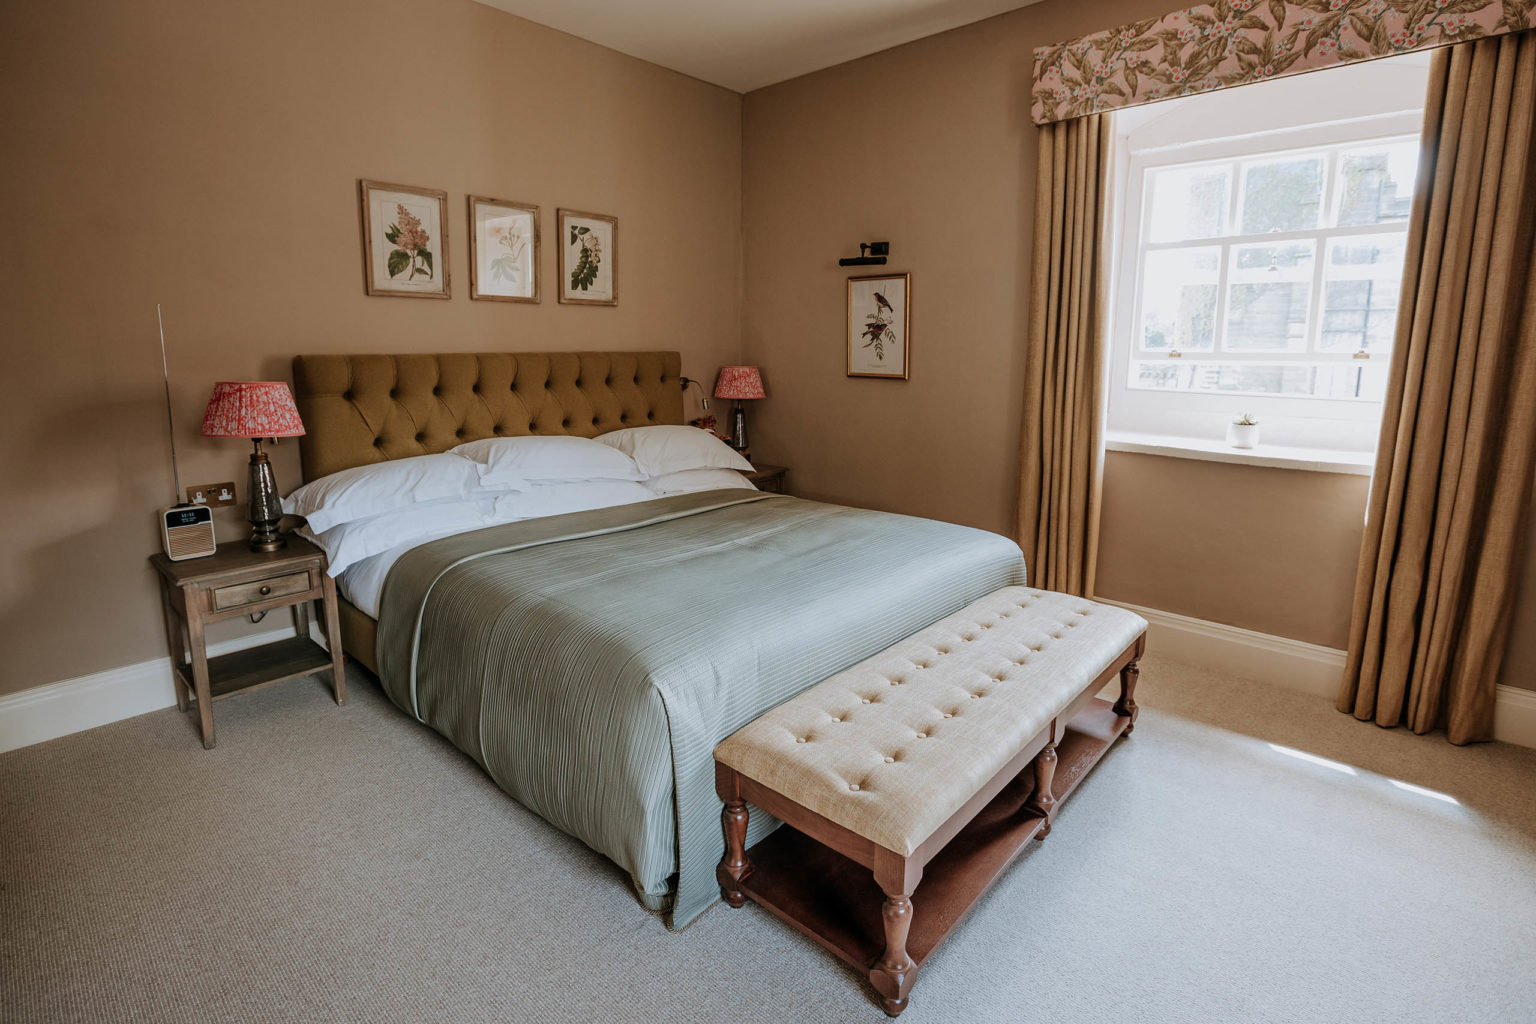 The bedroom of the Fearby Knights room at the Swinton Park dog-friendly spa hotel in North Yorkshire